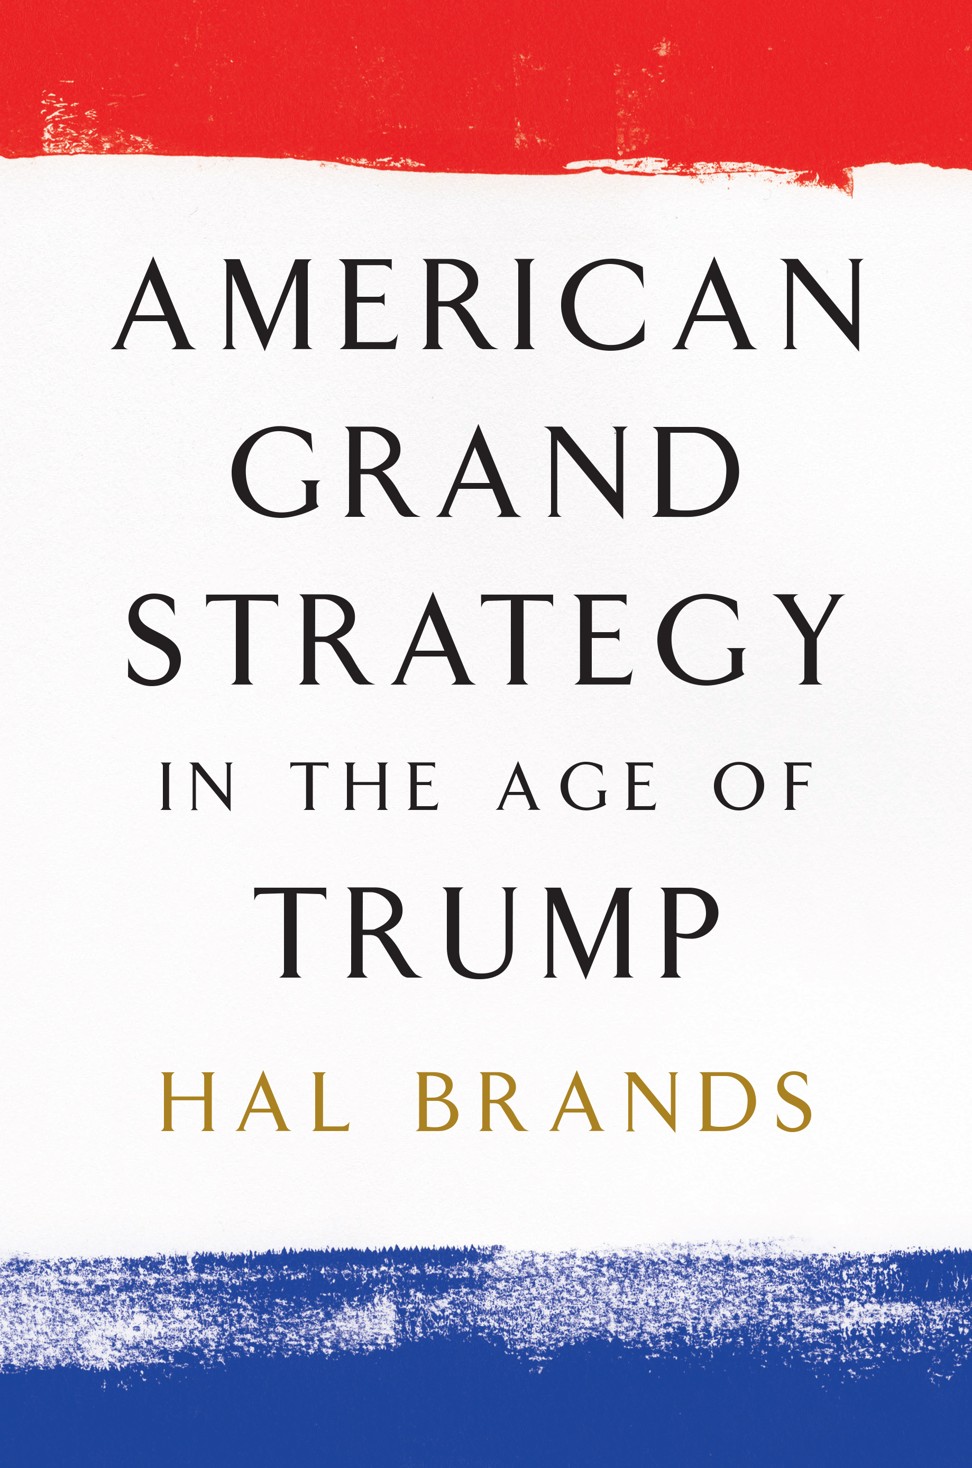 American Grand Strategy in the Age of Trump by Hal Brands.